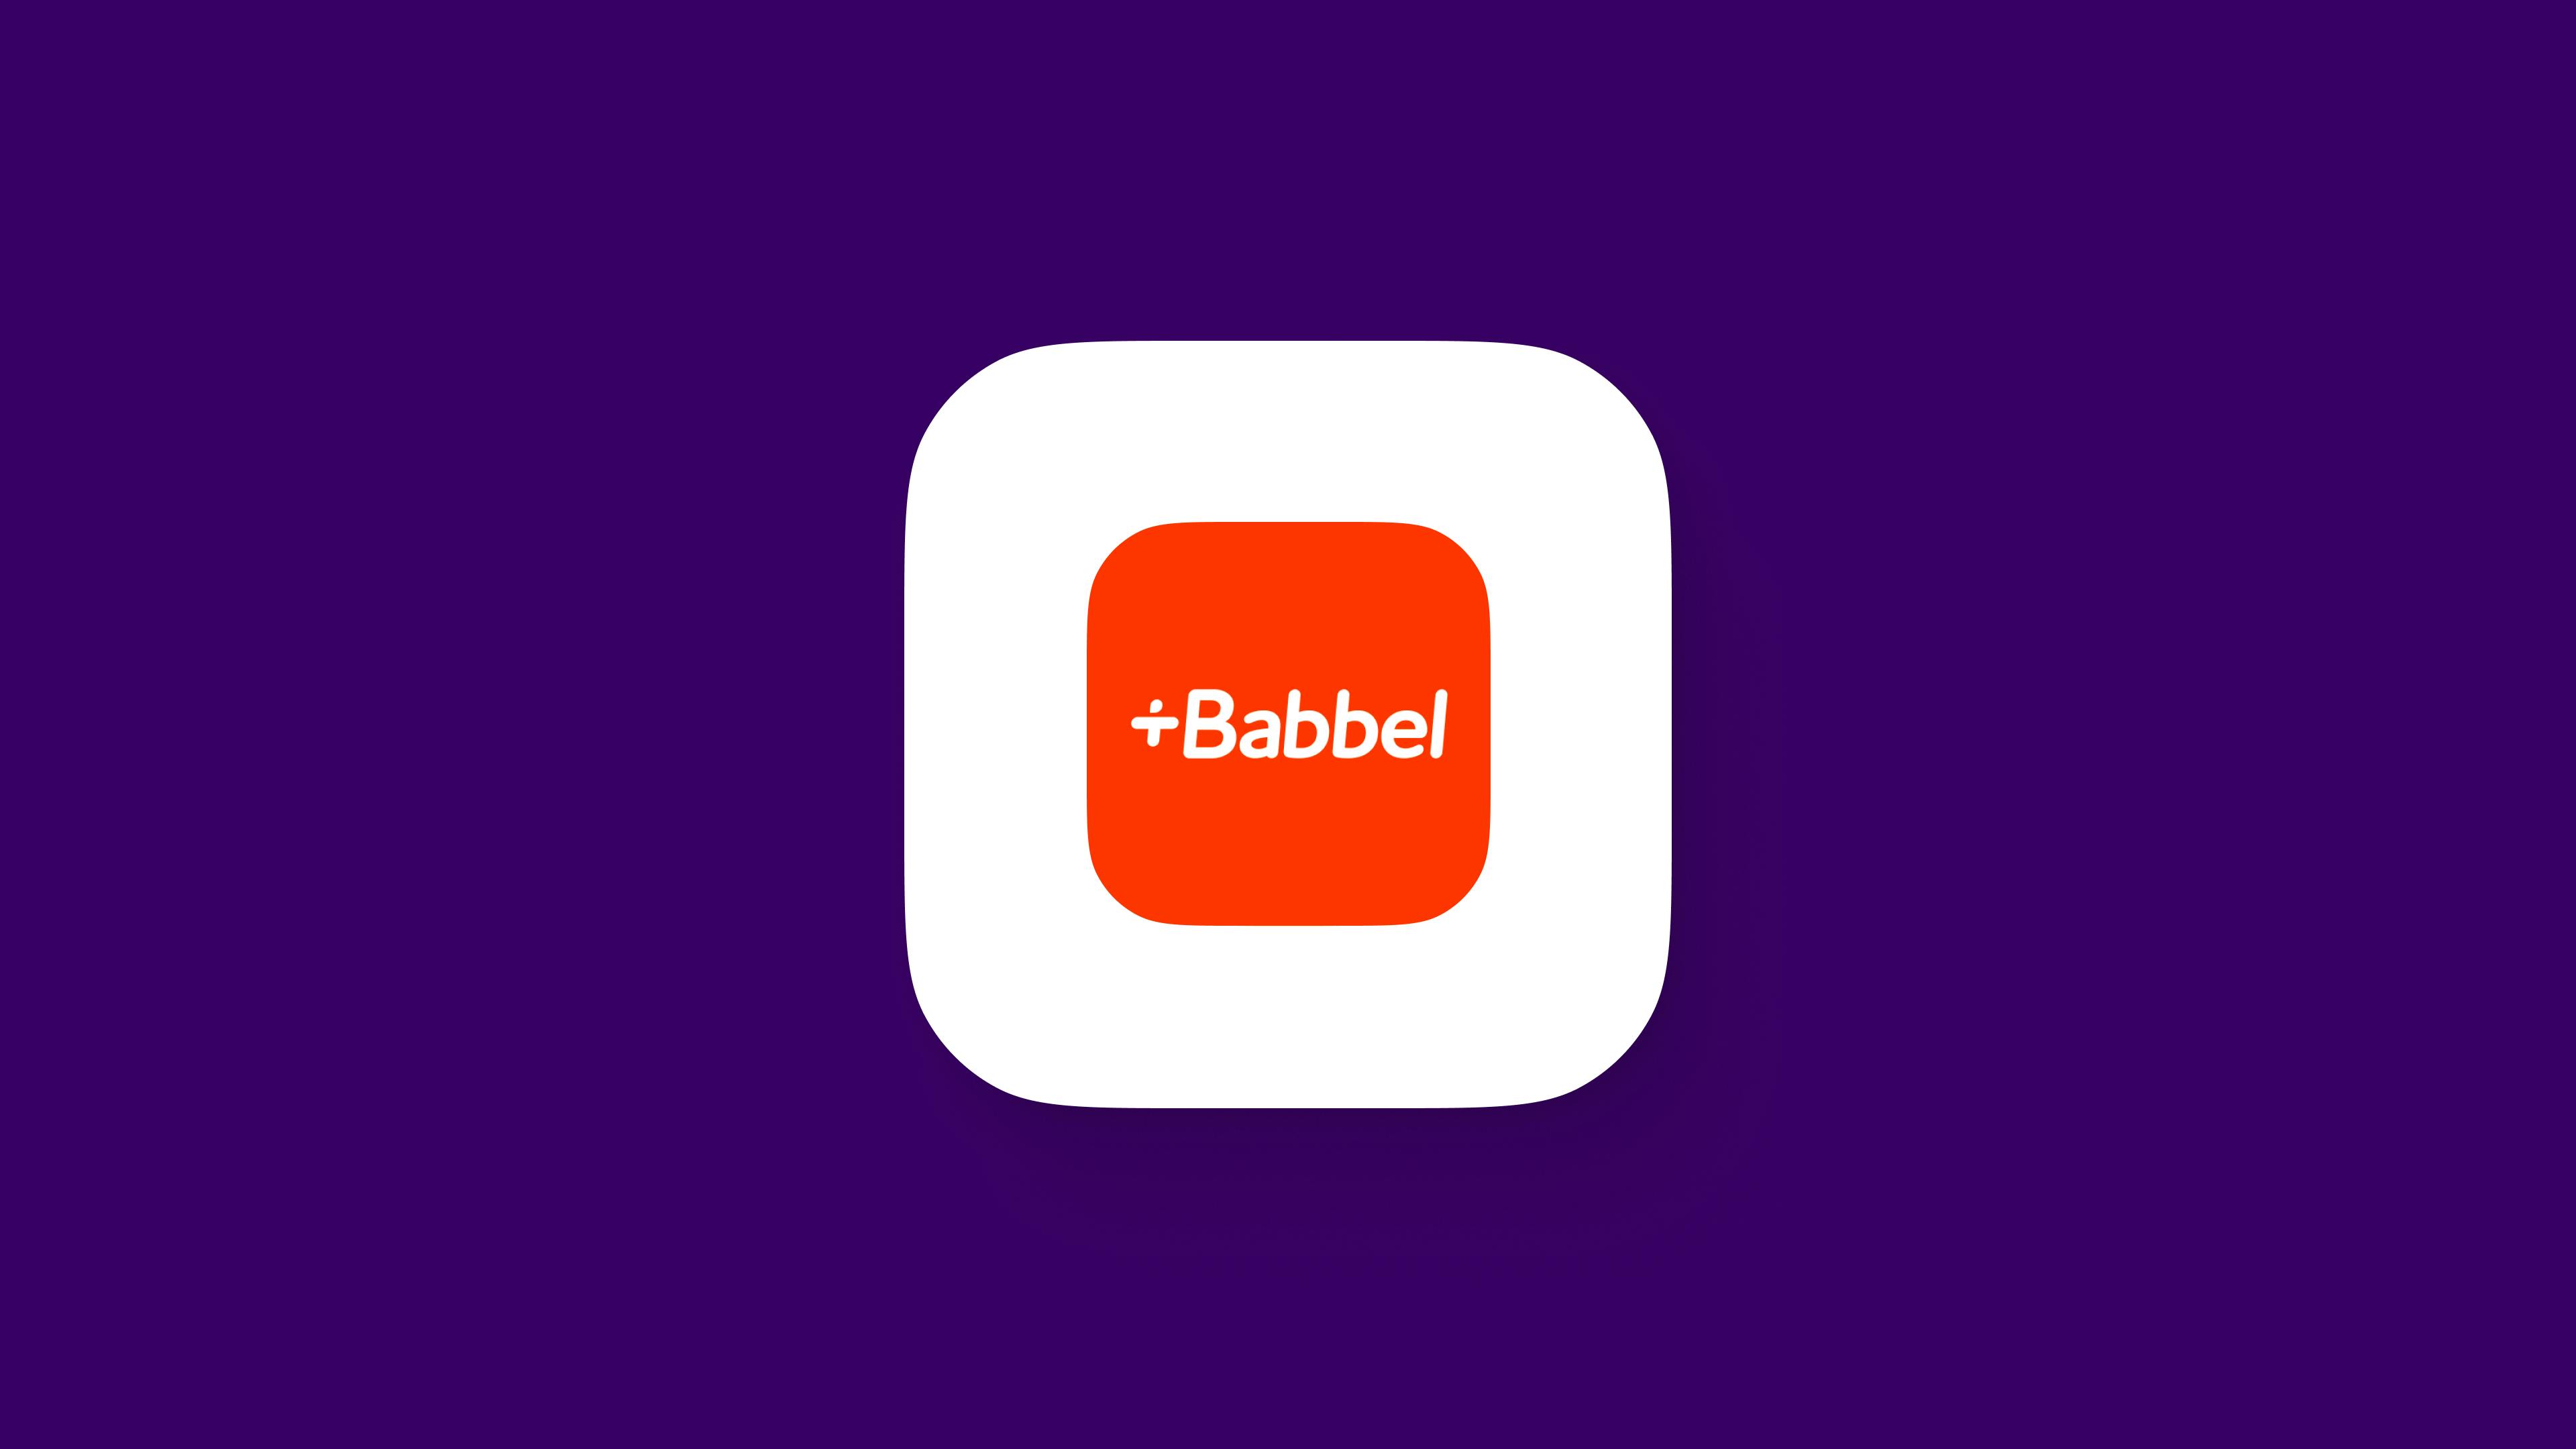 babbel for learning languages - Headway App